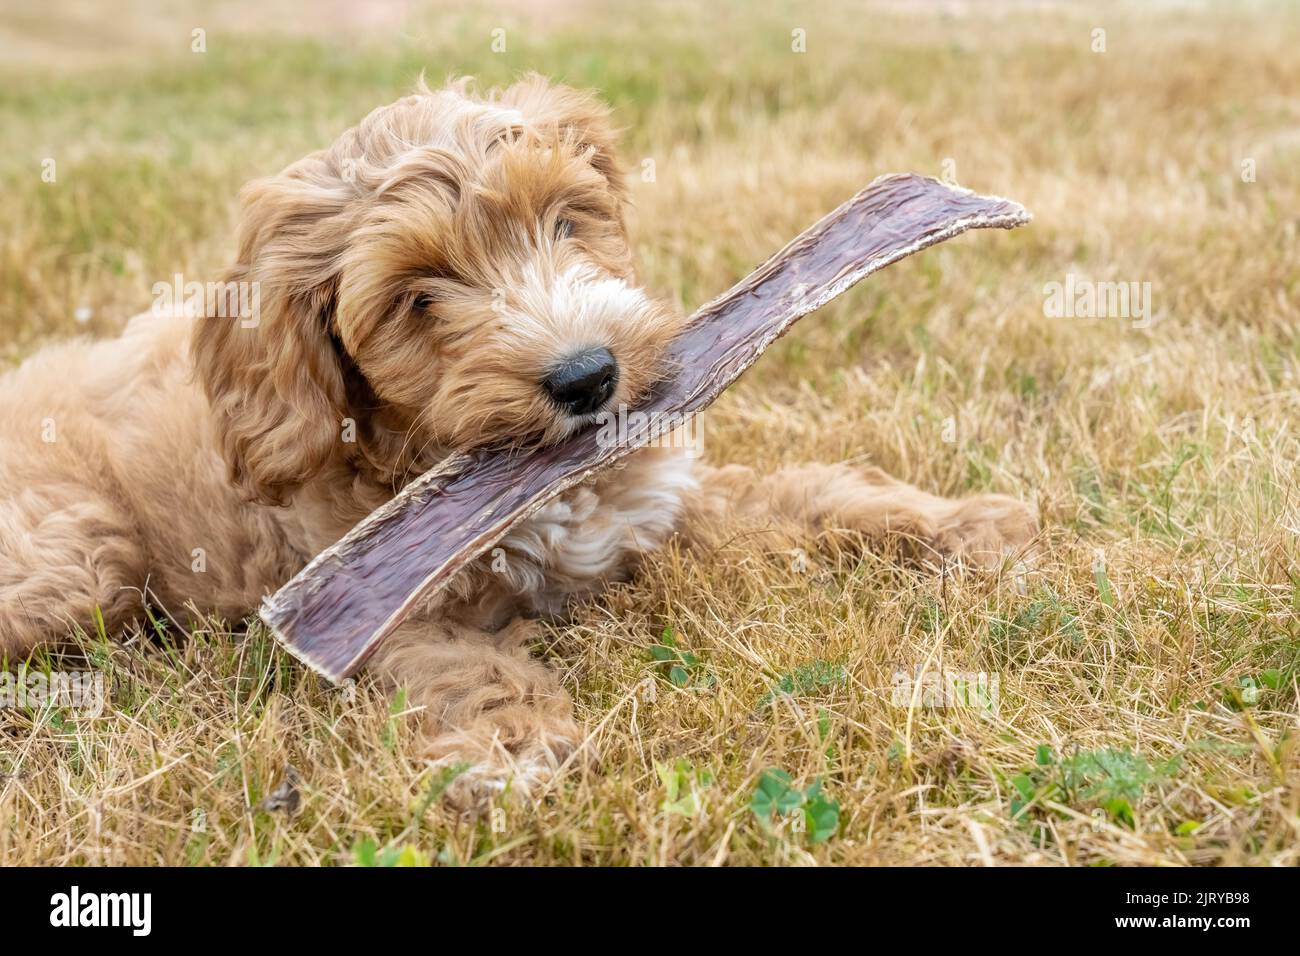 Issaquah, Washington, USA.  3-month old Aussiedoodle puppy named 'Bella' lying in a field eating a beef chew stick.  (PR) Stock Photo